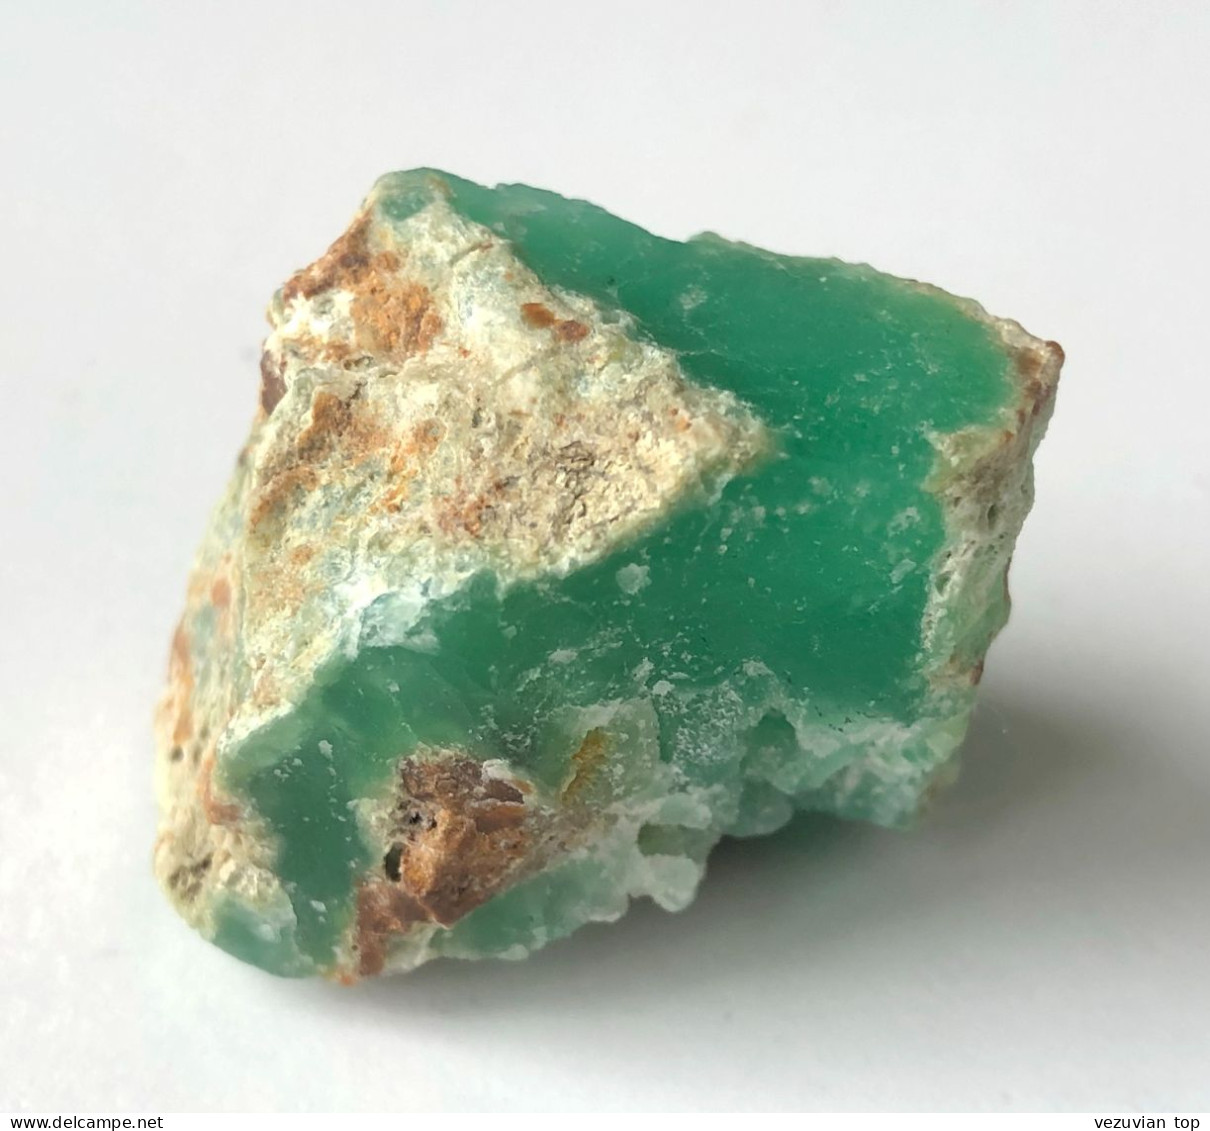 Chrysoprase, good quality specimen with deep rich green color